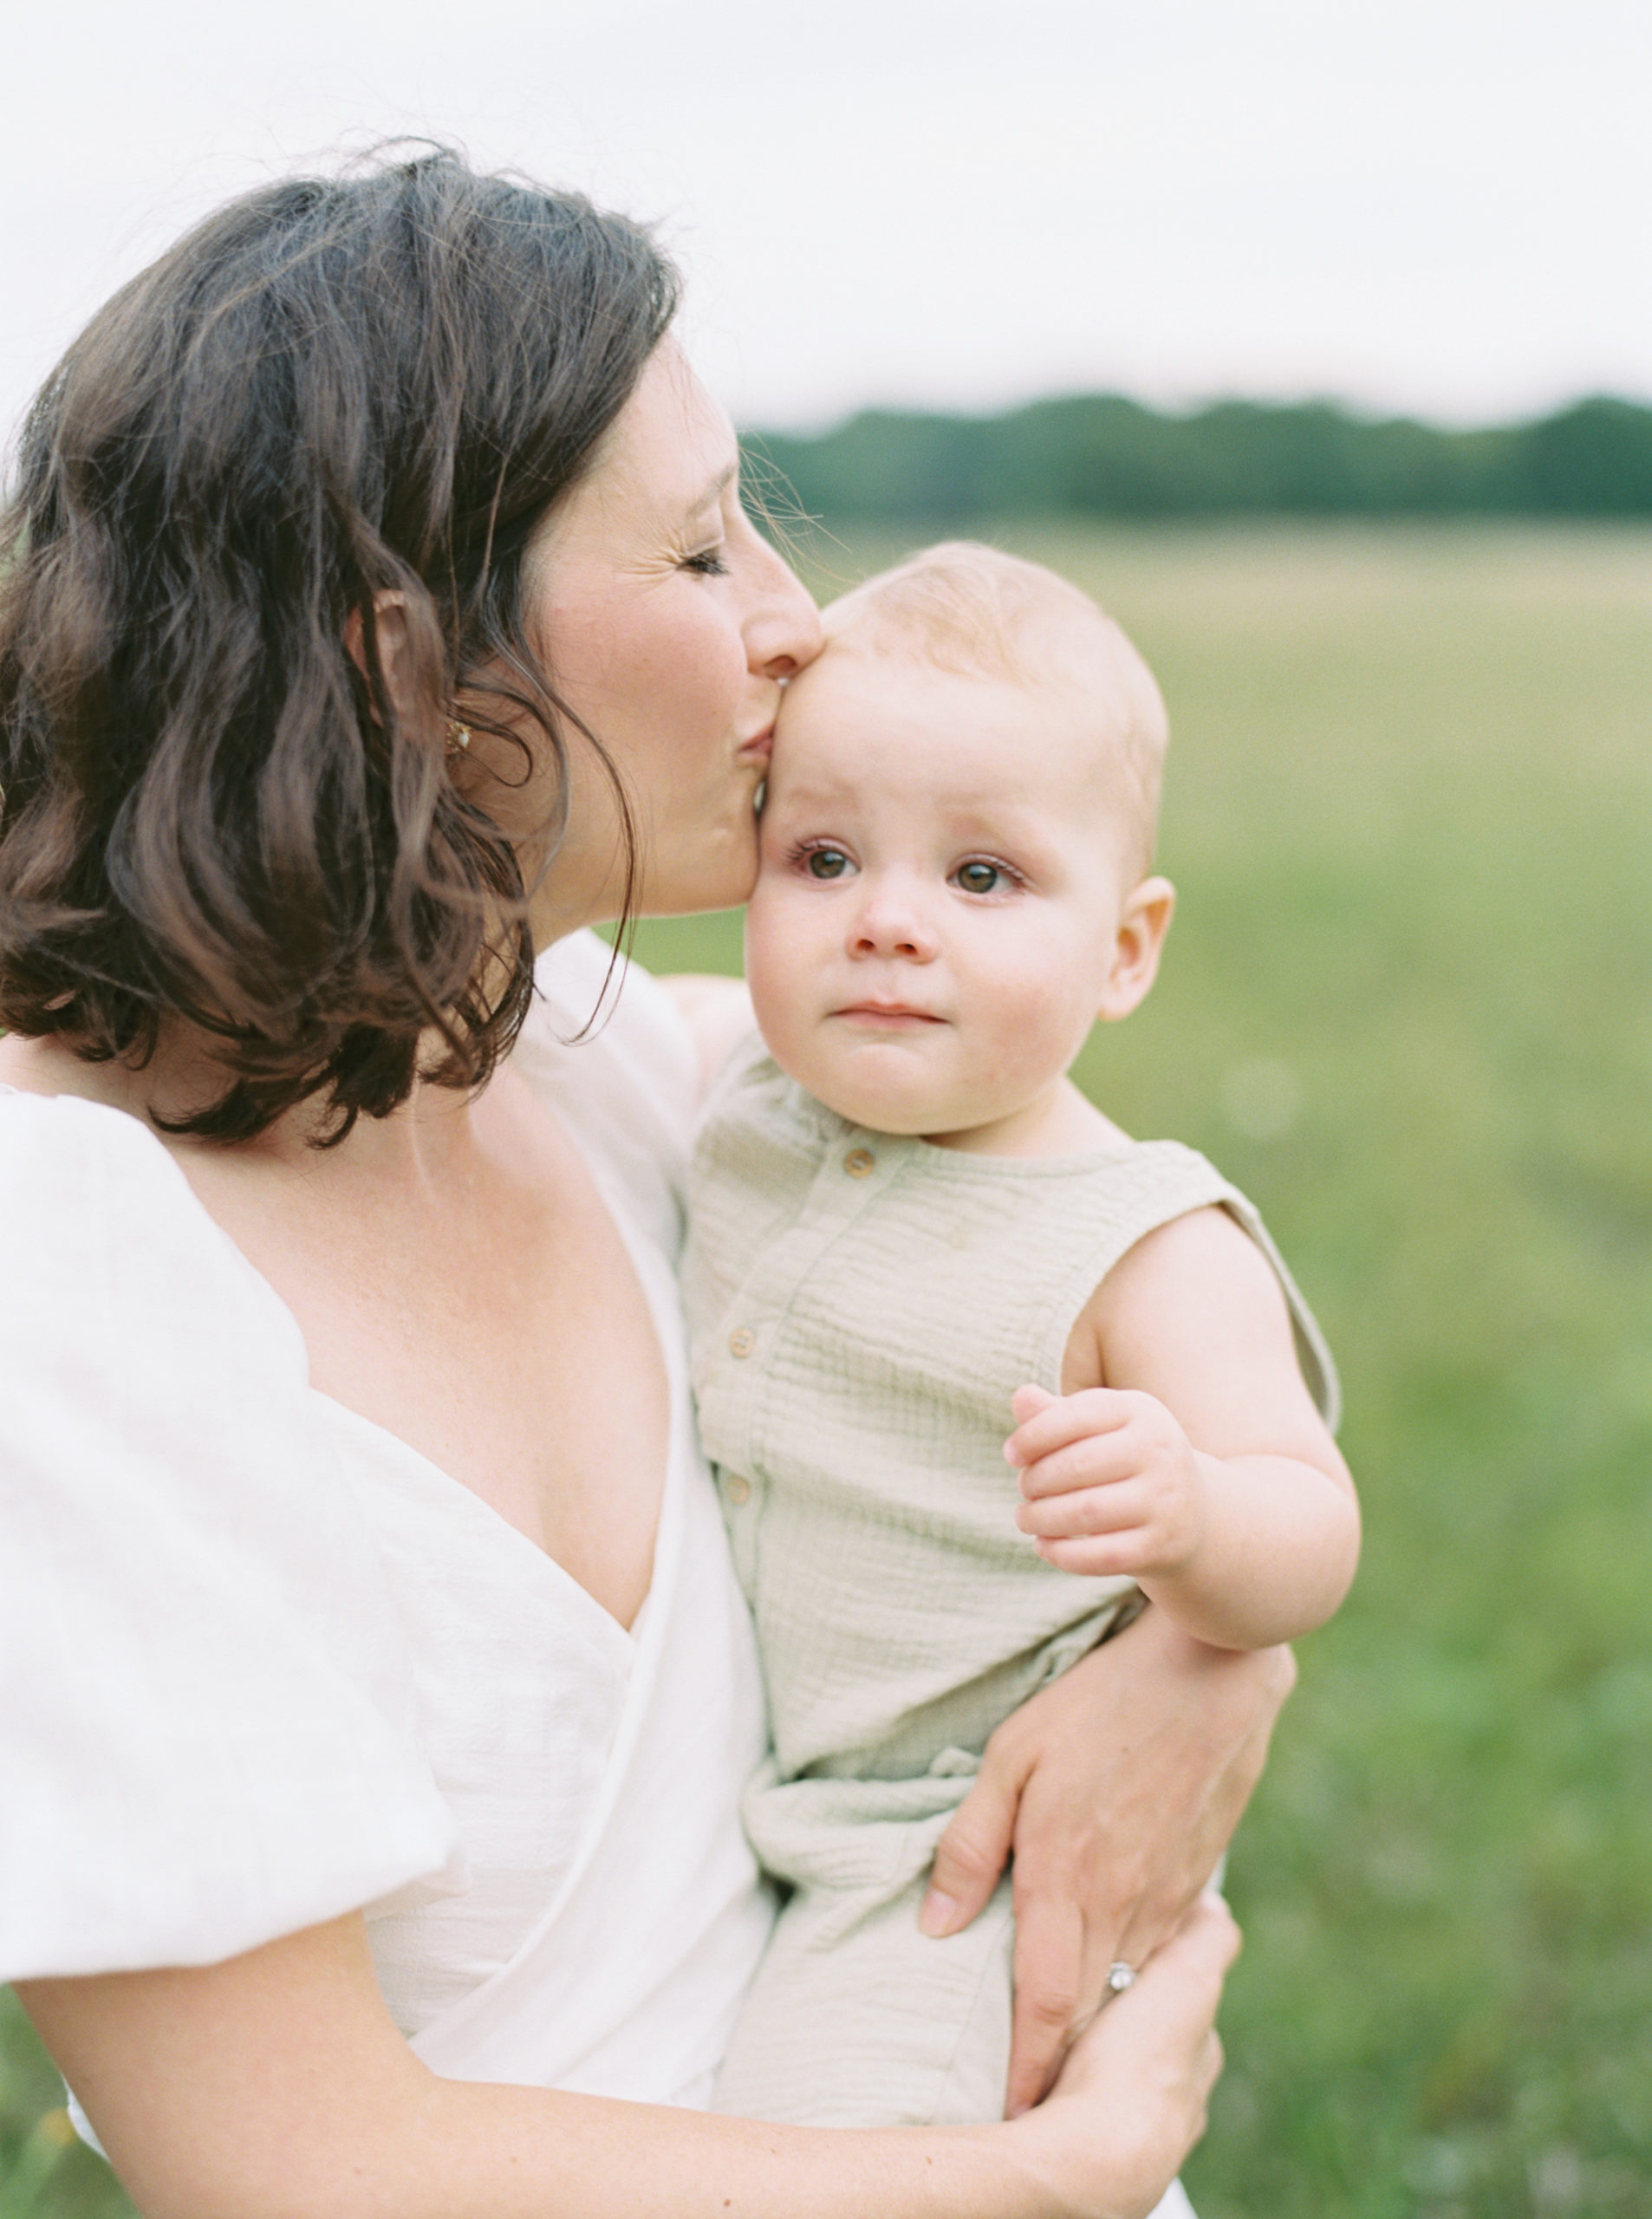 mother holding her baby in a grassy field for family portraits